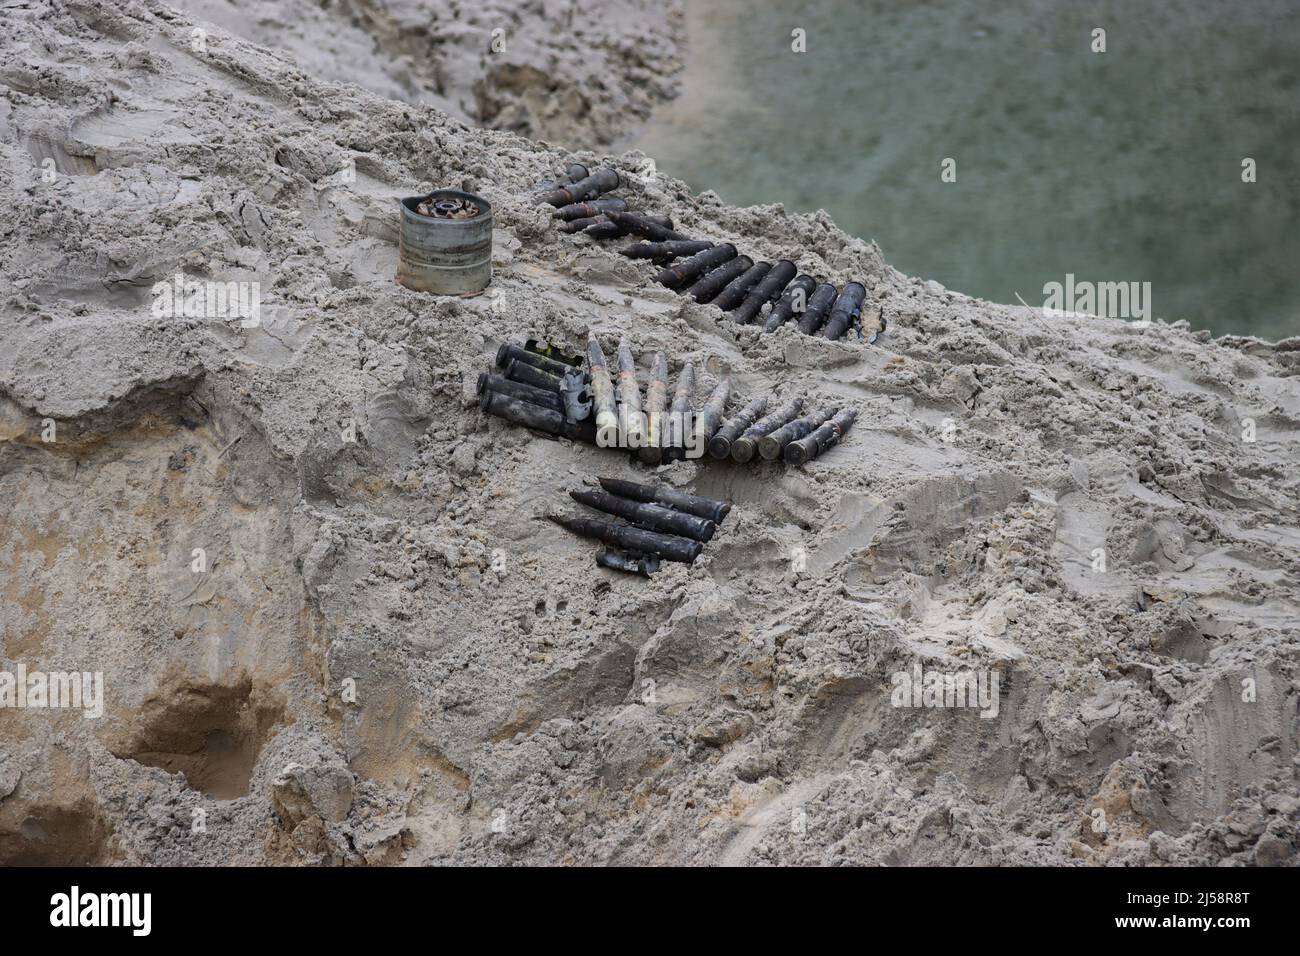 KYIV REGION, UKRAINE - APRIL 20, 2022 - Ammunition collected in the territories liberated from Russian invaders is arranged on the ground during an ex Stock Photo